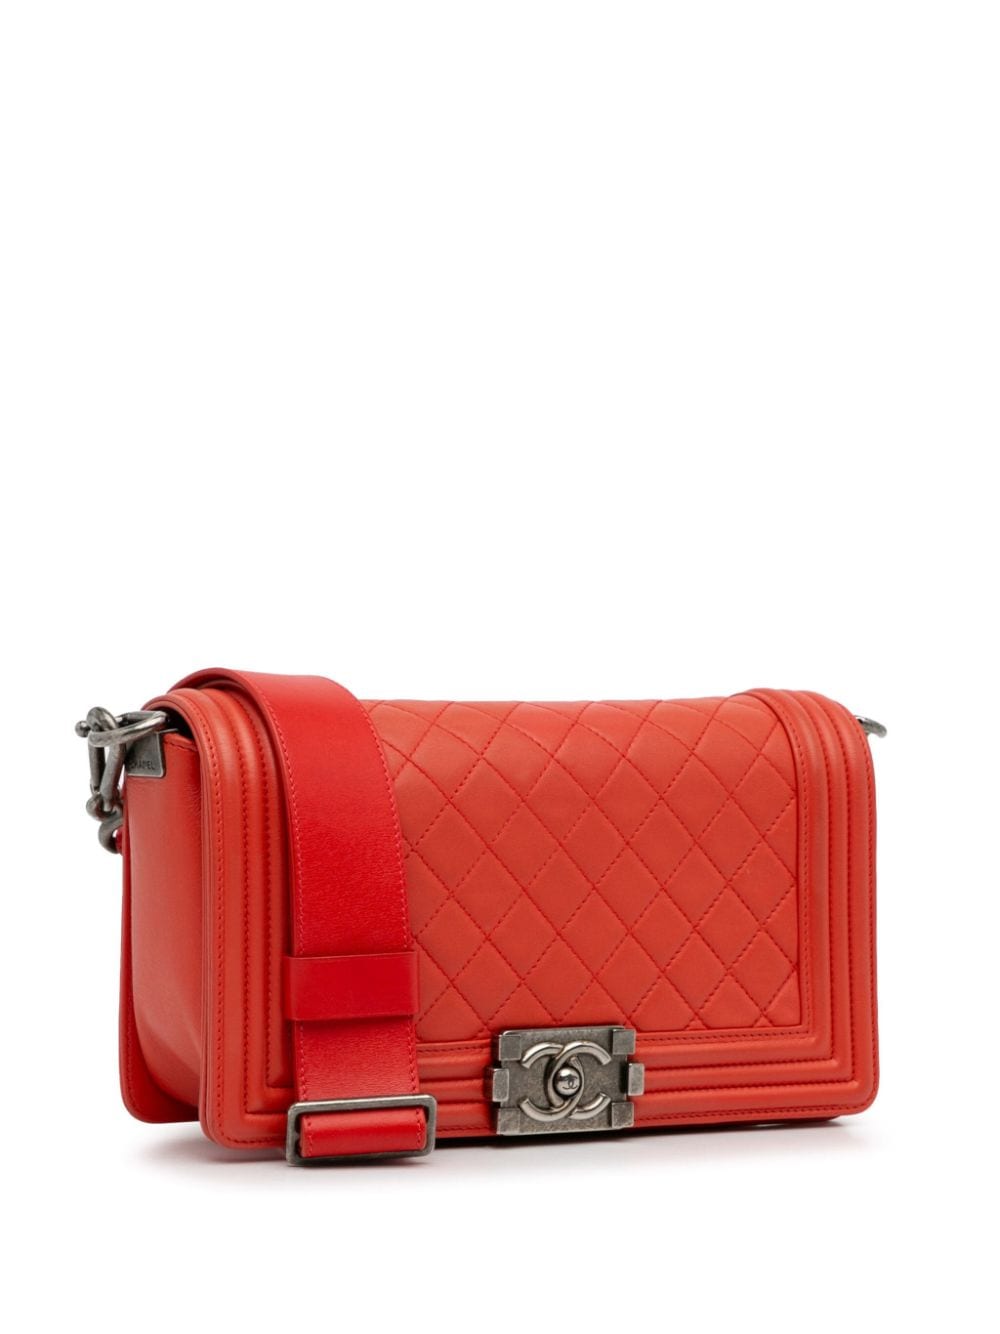 Pre-owned Chanel Medium Lambskin Boy Galuchat Strap Flap 斜挎包（2012年典藏款） In Red